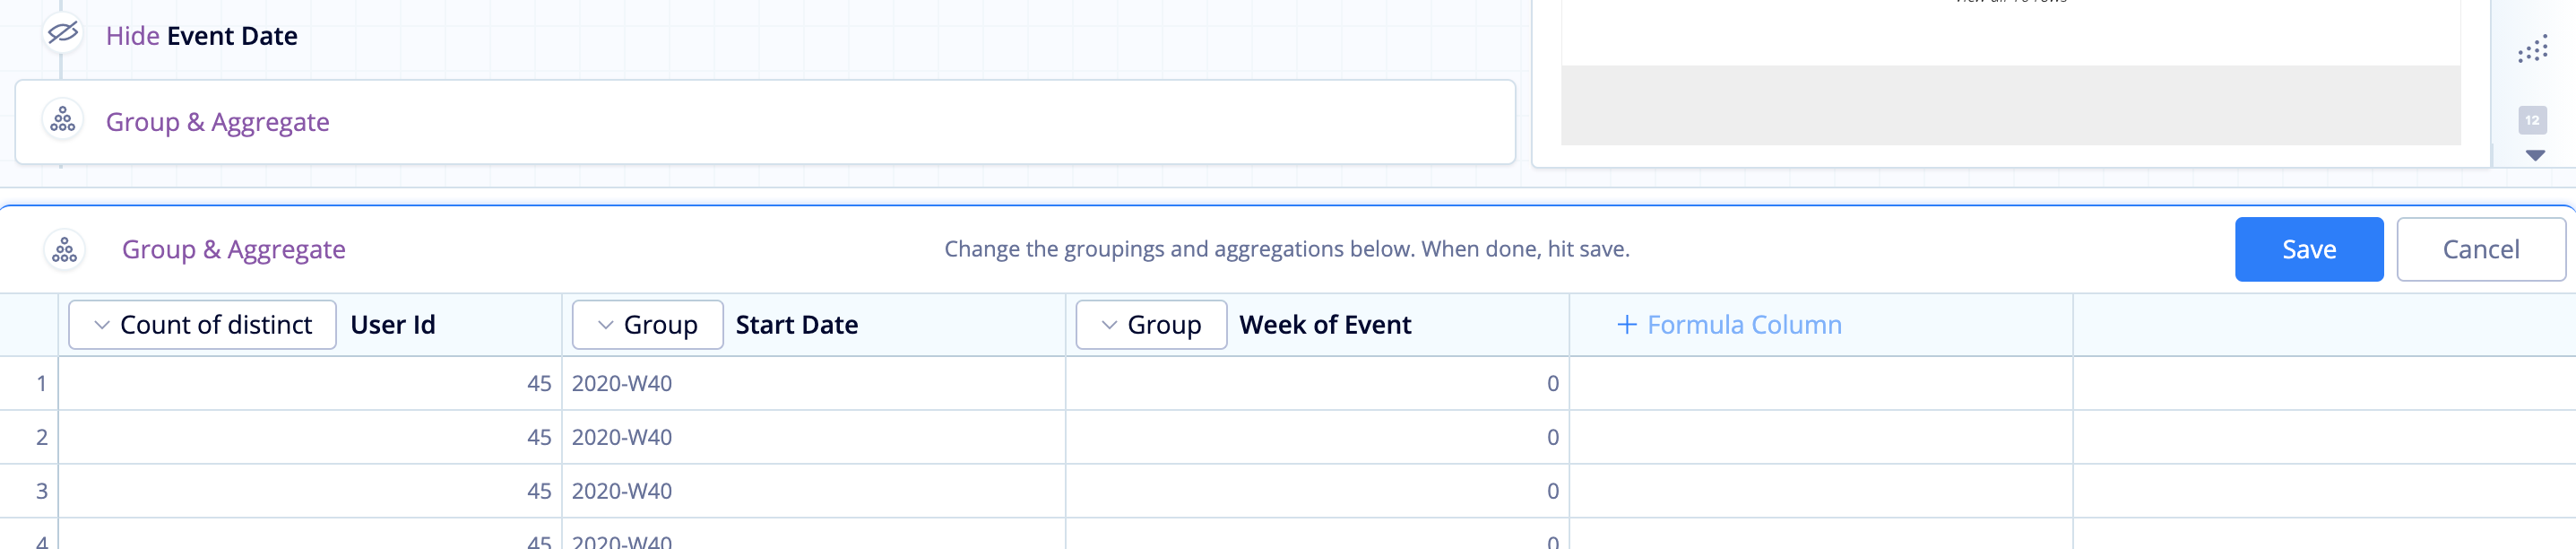 Use Group & Aggregate to Group by the Start Date and Week of Event and count distinct User Ids